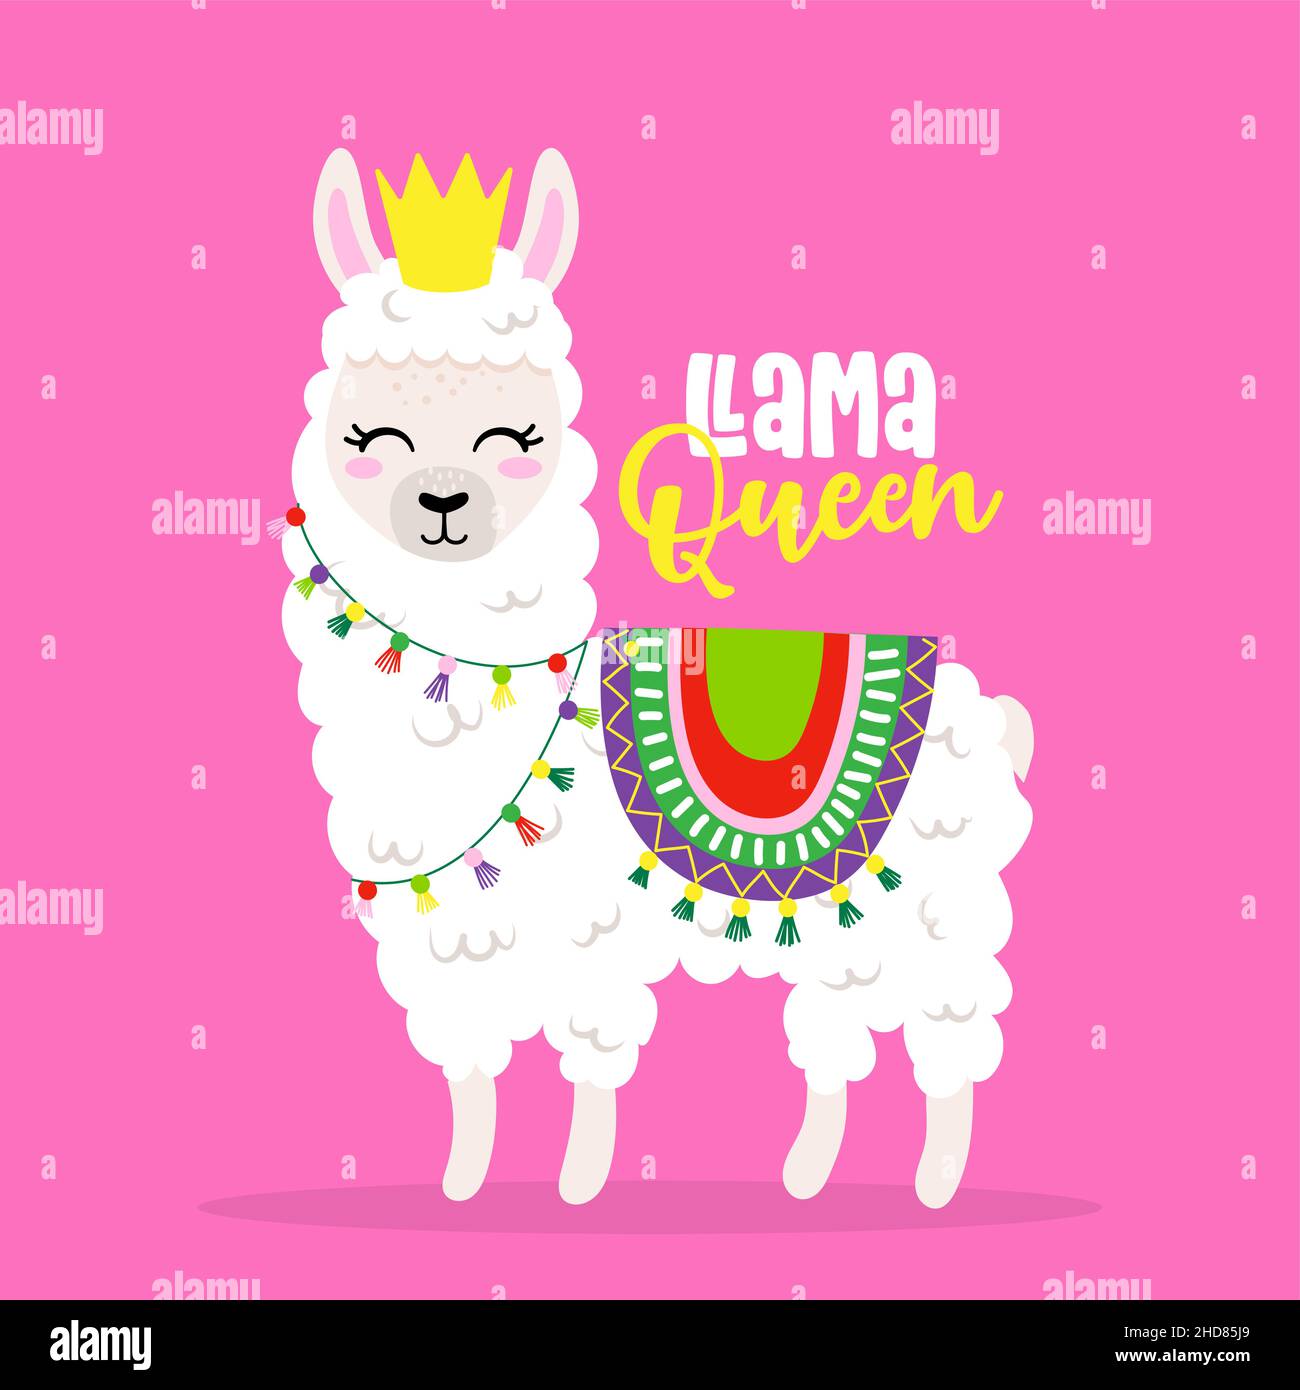 Queen t-shirt on Art llama drawing. llama Amazing illustration or quotes & funny - Image design. Stock textile vector Lettering Vector Llama - poster isola character graphic Alamy and